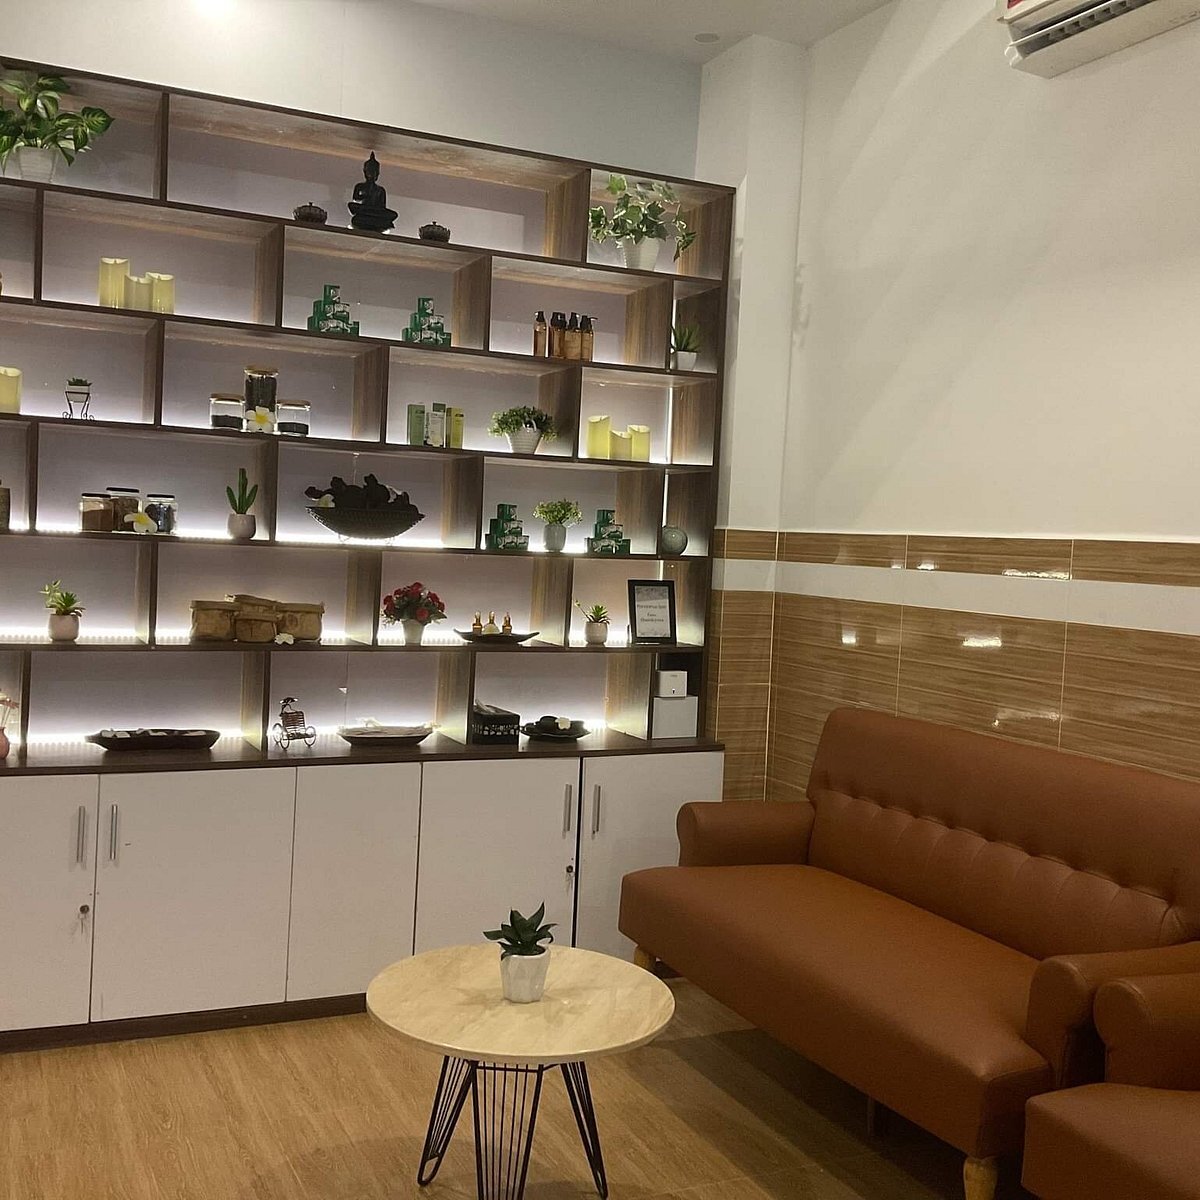 Pandanus Spa provides cozy space with relaxing scent